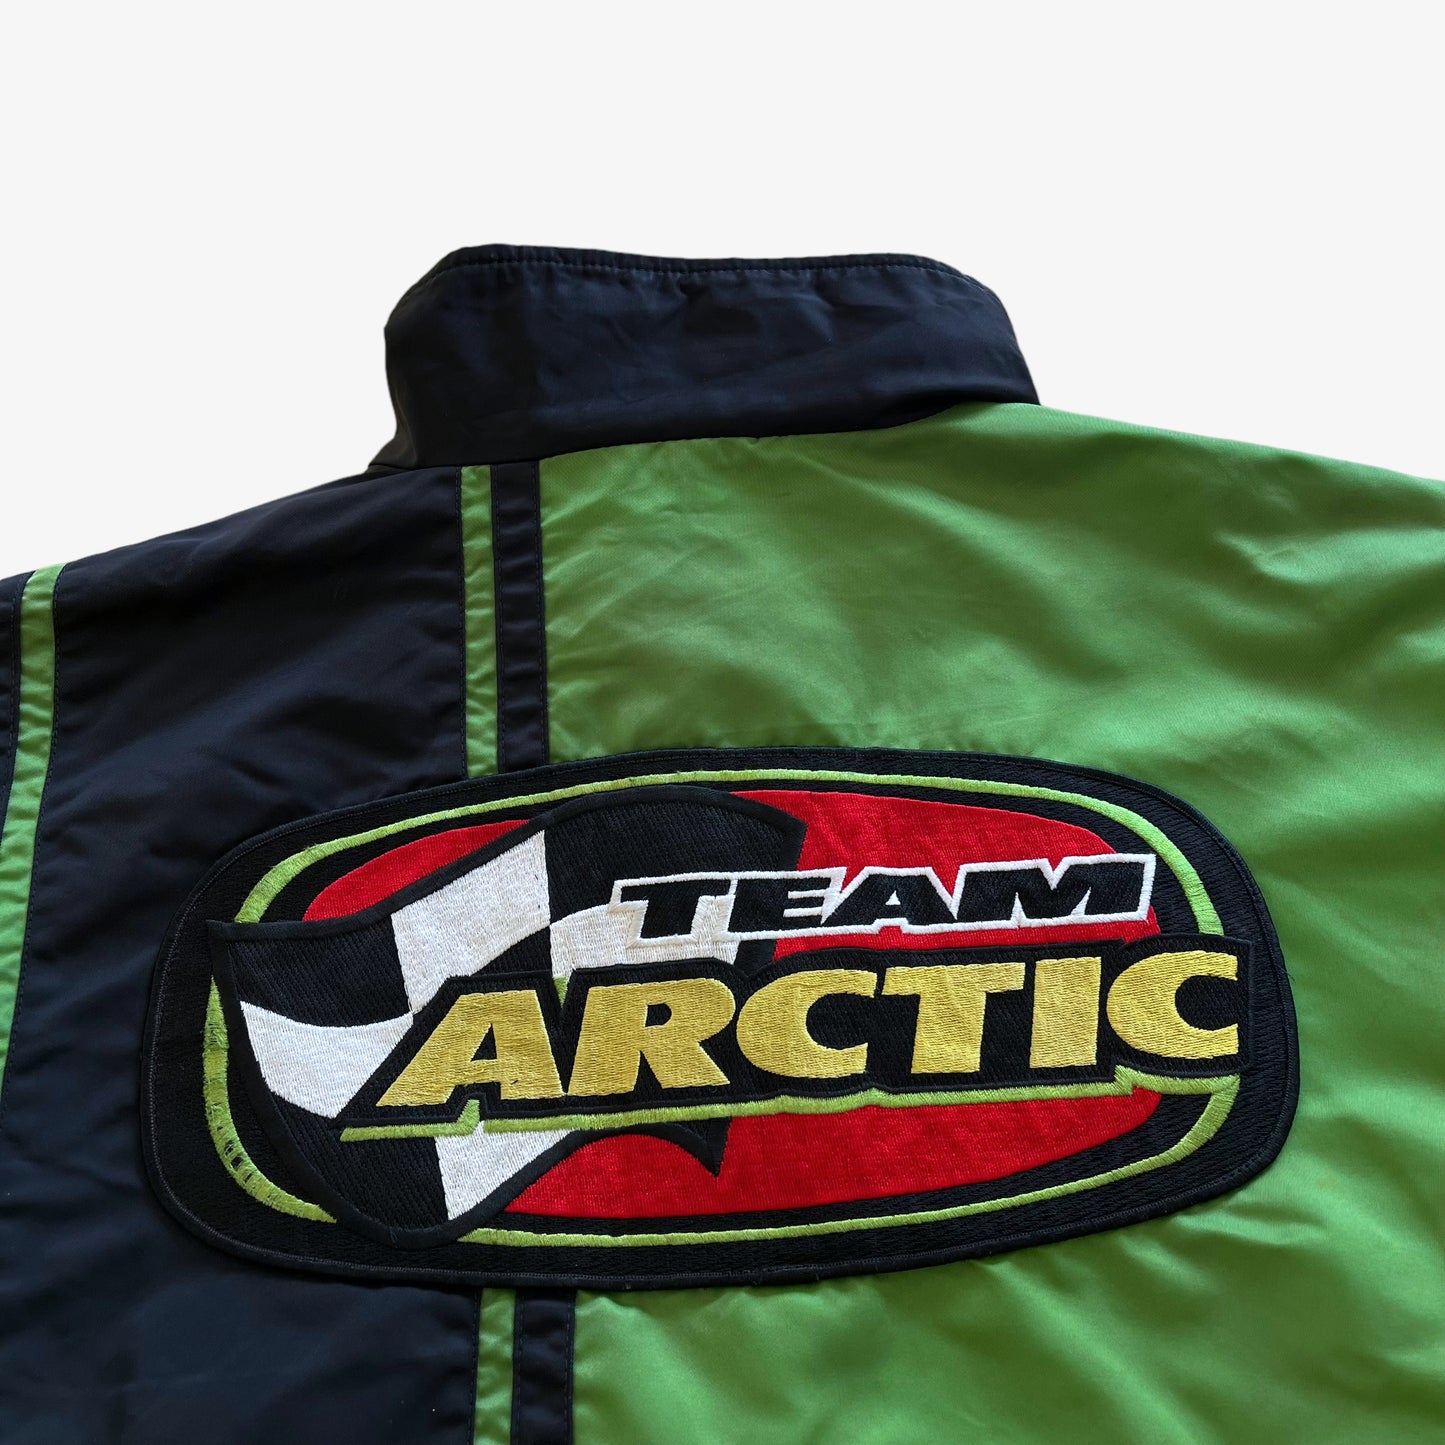 Vintage 90s Mens Artic Cat Racing Team Thinsulate Green & Black Jacket Embroidered - Casspios Dream